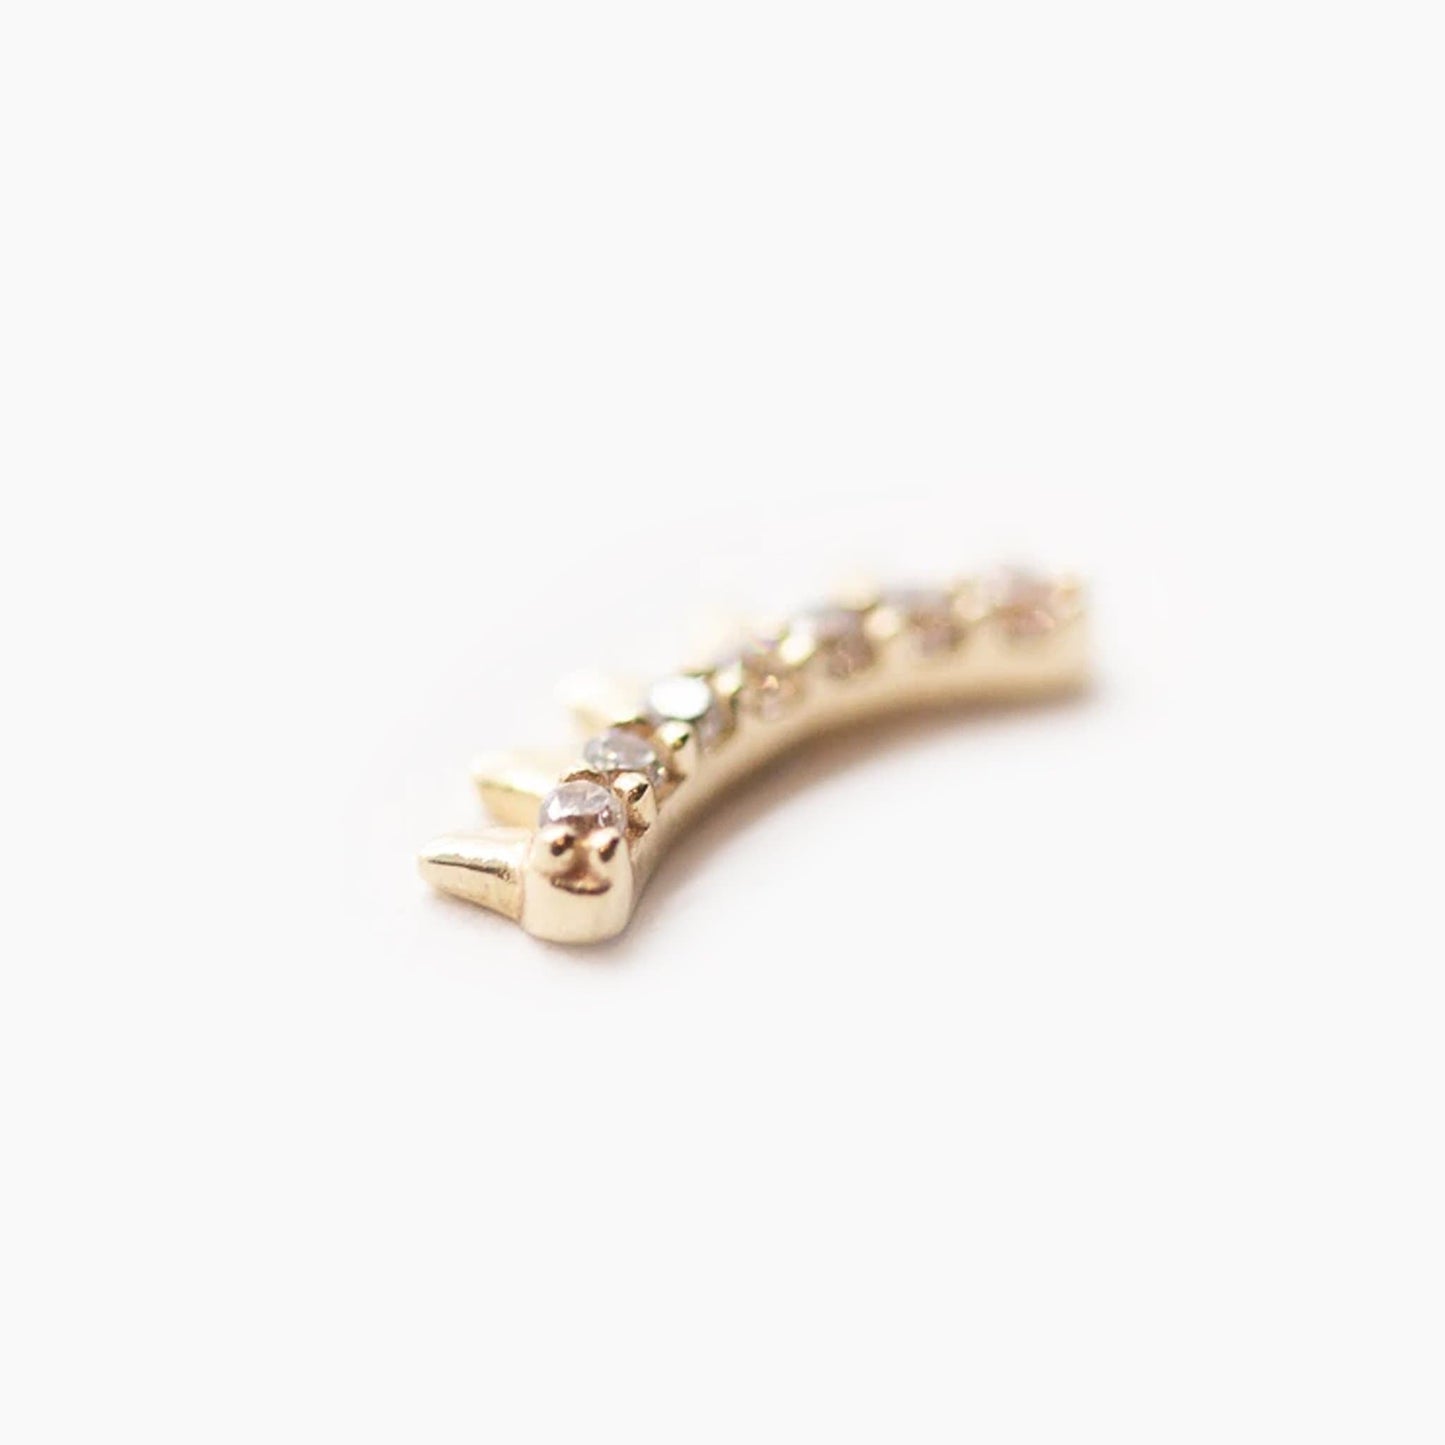 Petite Curved Spike Strip | 14K Threadless Top  For Nose, Ears & Lip